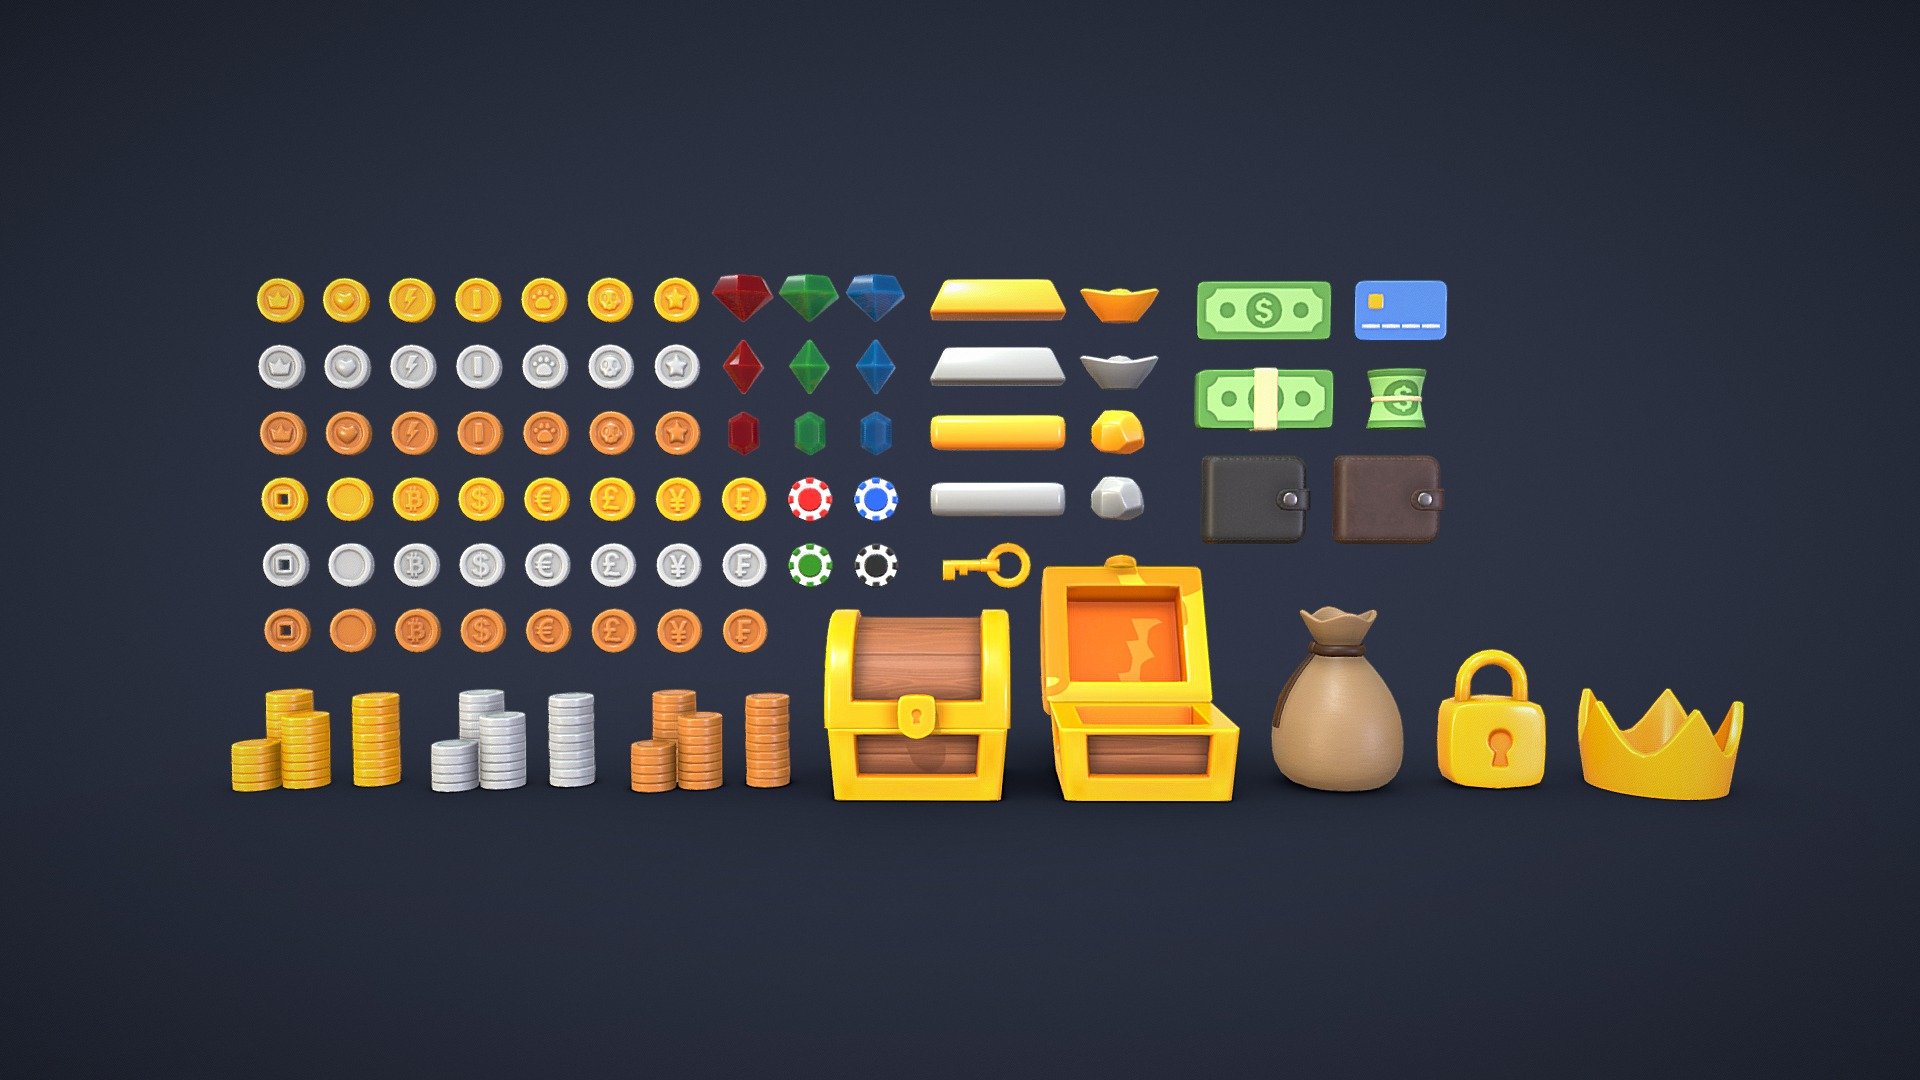 Pack of 89 models Treasure and Reward Props

Pack include:




Coin - 160 tris

Bitcoin  - 160 tris

Chinese Coin - 320 tris

Crown Coin - 160 tris

Dollar Coin - 160 tris

Euro Coin - 160 tris

Franc Coin - 160 tris

Heart Coin - 160 tris

Lightning Coin - 160 tris

Mario Coin - 160 tris

Paw Coin - 160 tris

Pound Coin - 160 tris

Skull Coin - 160 tris

Yen Coin - 160 tris

Pile of 5 Coin - 160 tris

Pile of 8 Coin - 160 tris

Pile of 10 Coin - 160 tris

Pile of random 10 Coin - 1240 tris

Bank Card - 172 tris

Chinese Bar - 320 tris

Bar - 108 tris

Cash - 108 tris

Cash Pile - 188 tris

Cash Roll - 520 tris

Chest - 736 tris

Crown - 500 tris

Asscher Diamond - 94 tris

Emerald Diamond - 116 tris

Rhombus Diamond - 72 tris

Ingot - 108 tris

Lock - 328 tris

Cash Roll - 520 tris

Key - 402 tris

Poker Chip - 256 tris

Rock - 526 tris

Wallet - 948 tris

Money Bag - 1968 tris

Diffuse, Normal, Roughness and Metalic textures

2048x2048 PNG textures

AR / VR / Mobile ready - Treasure and Reward Pack - Buy Royalty Free 3D model by Andrii Sedykh (@andriisedykh) 3d model